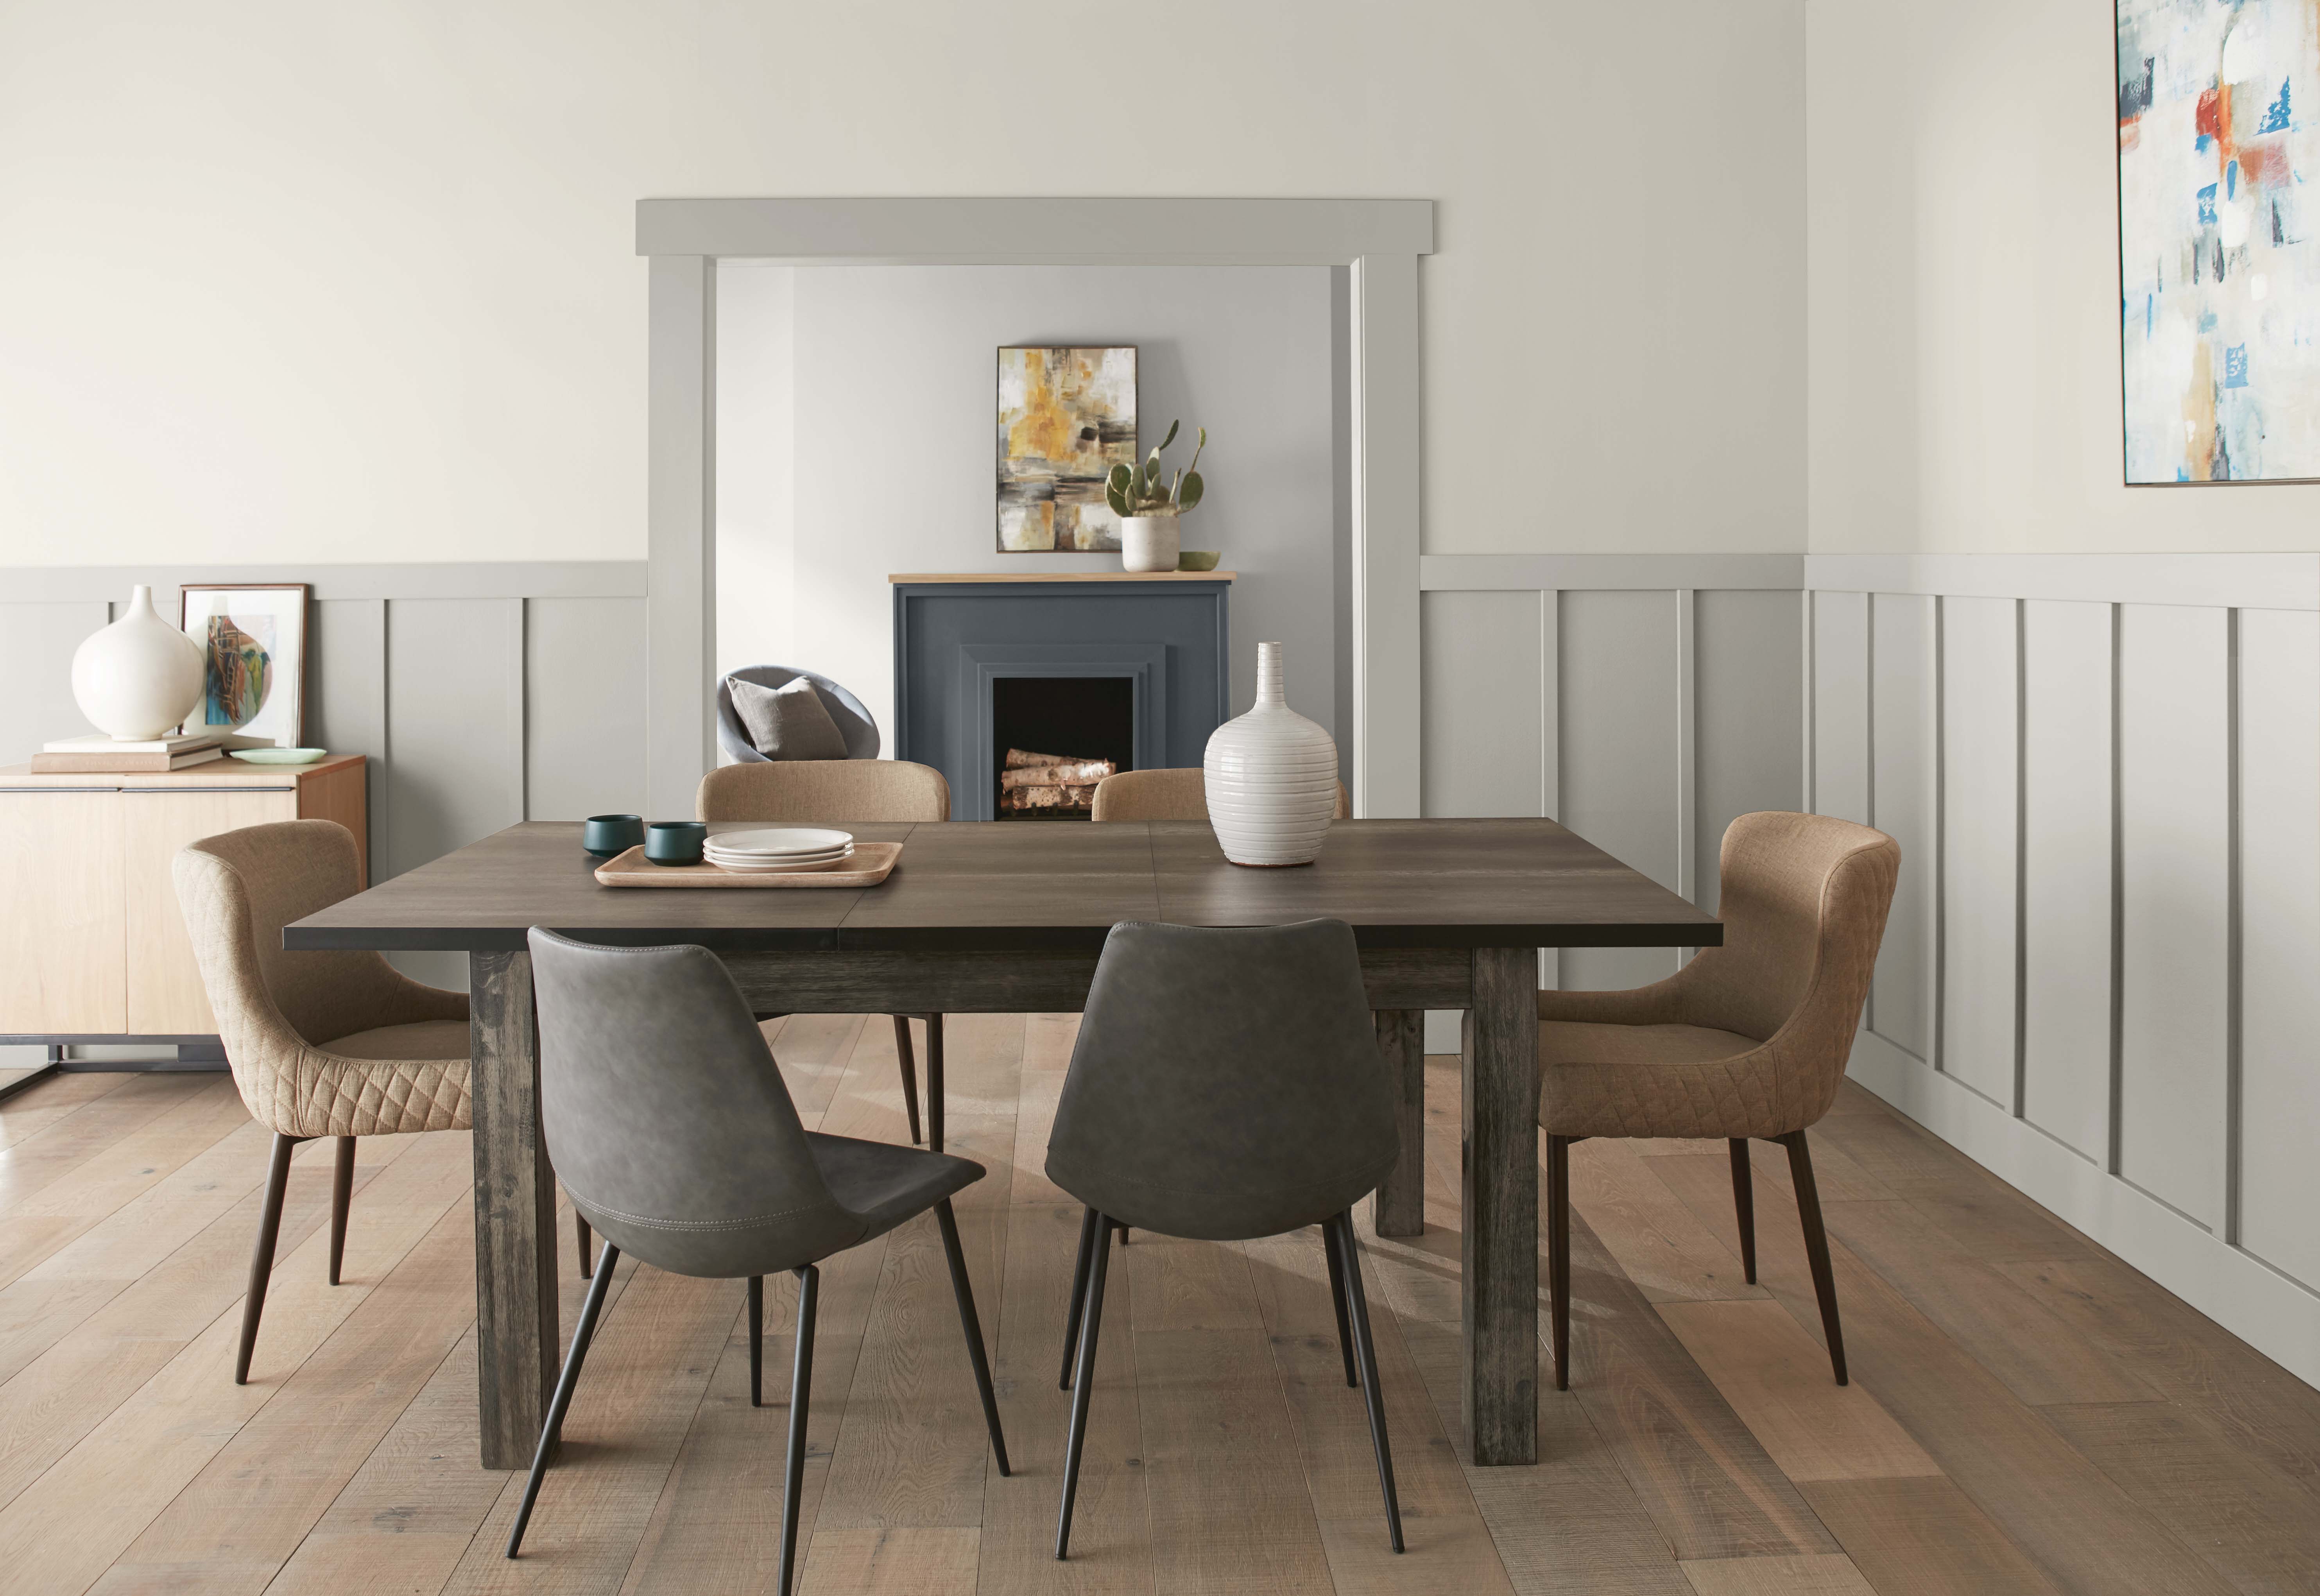 A neutral dining room with walls painted in Tranquil Gray and board and batten in Greige